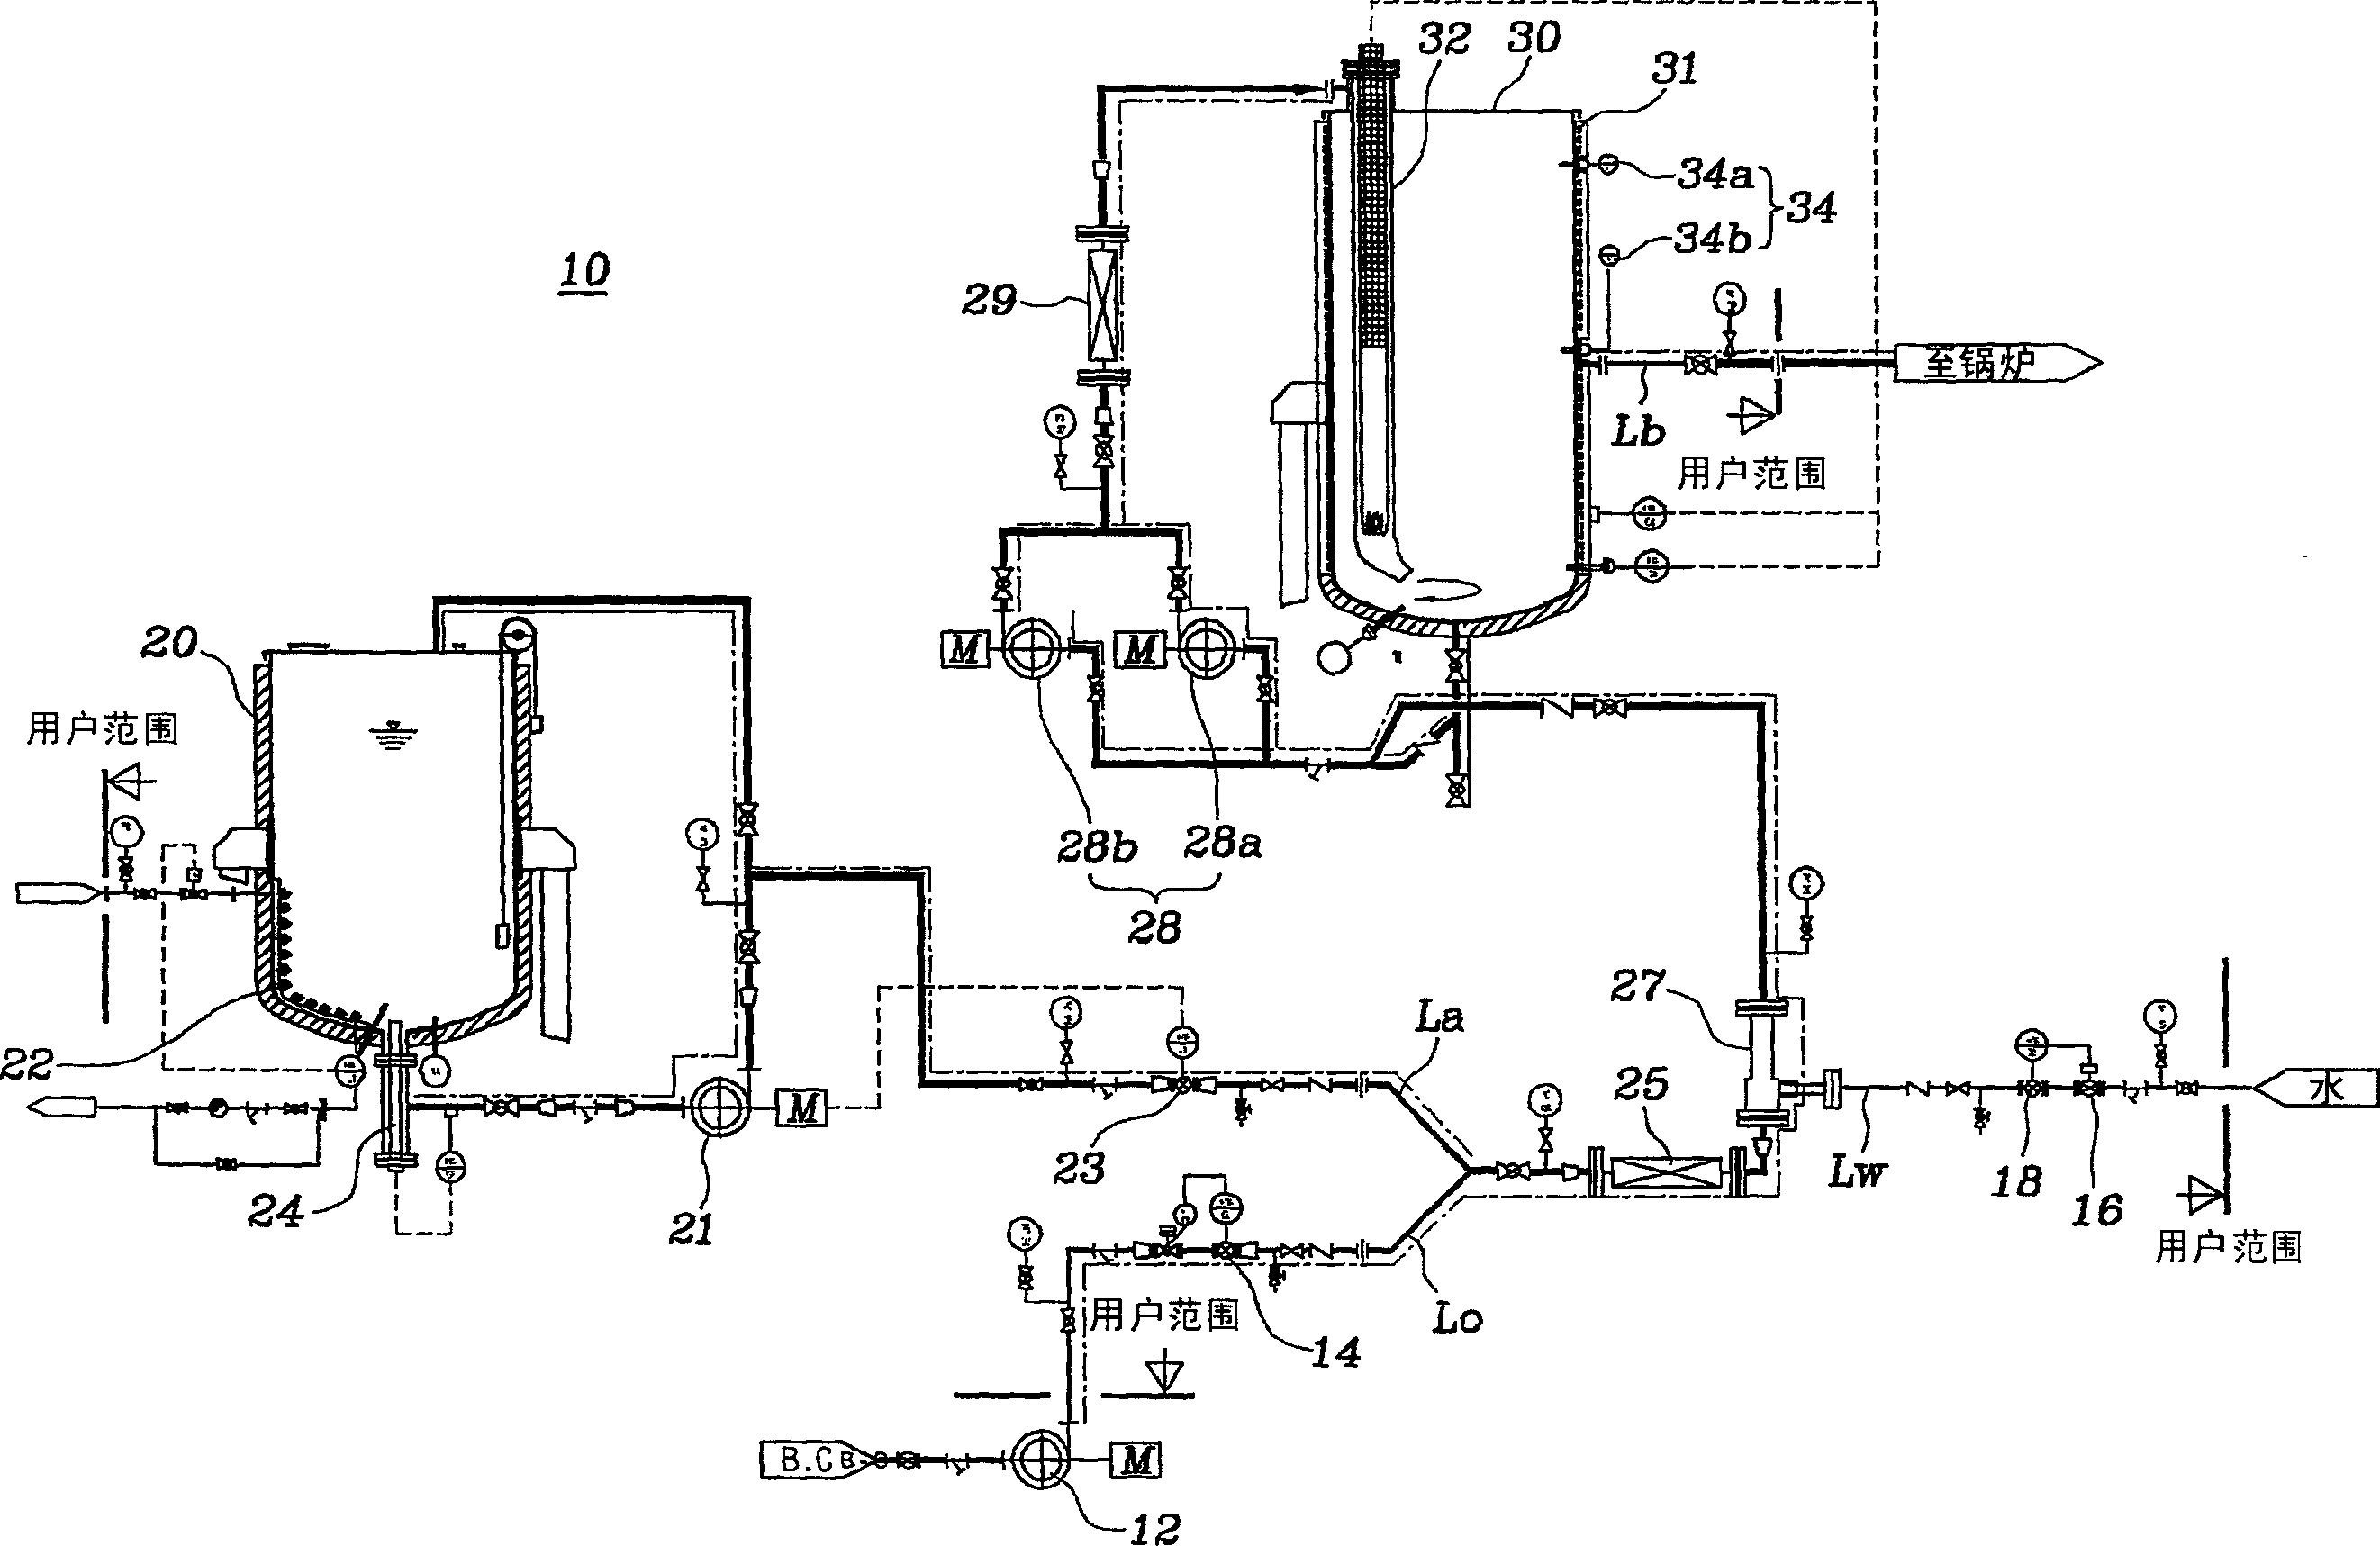 Apparatus for producing water-in-oil emulsified fuel and supplying the same